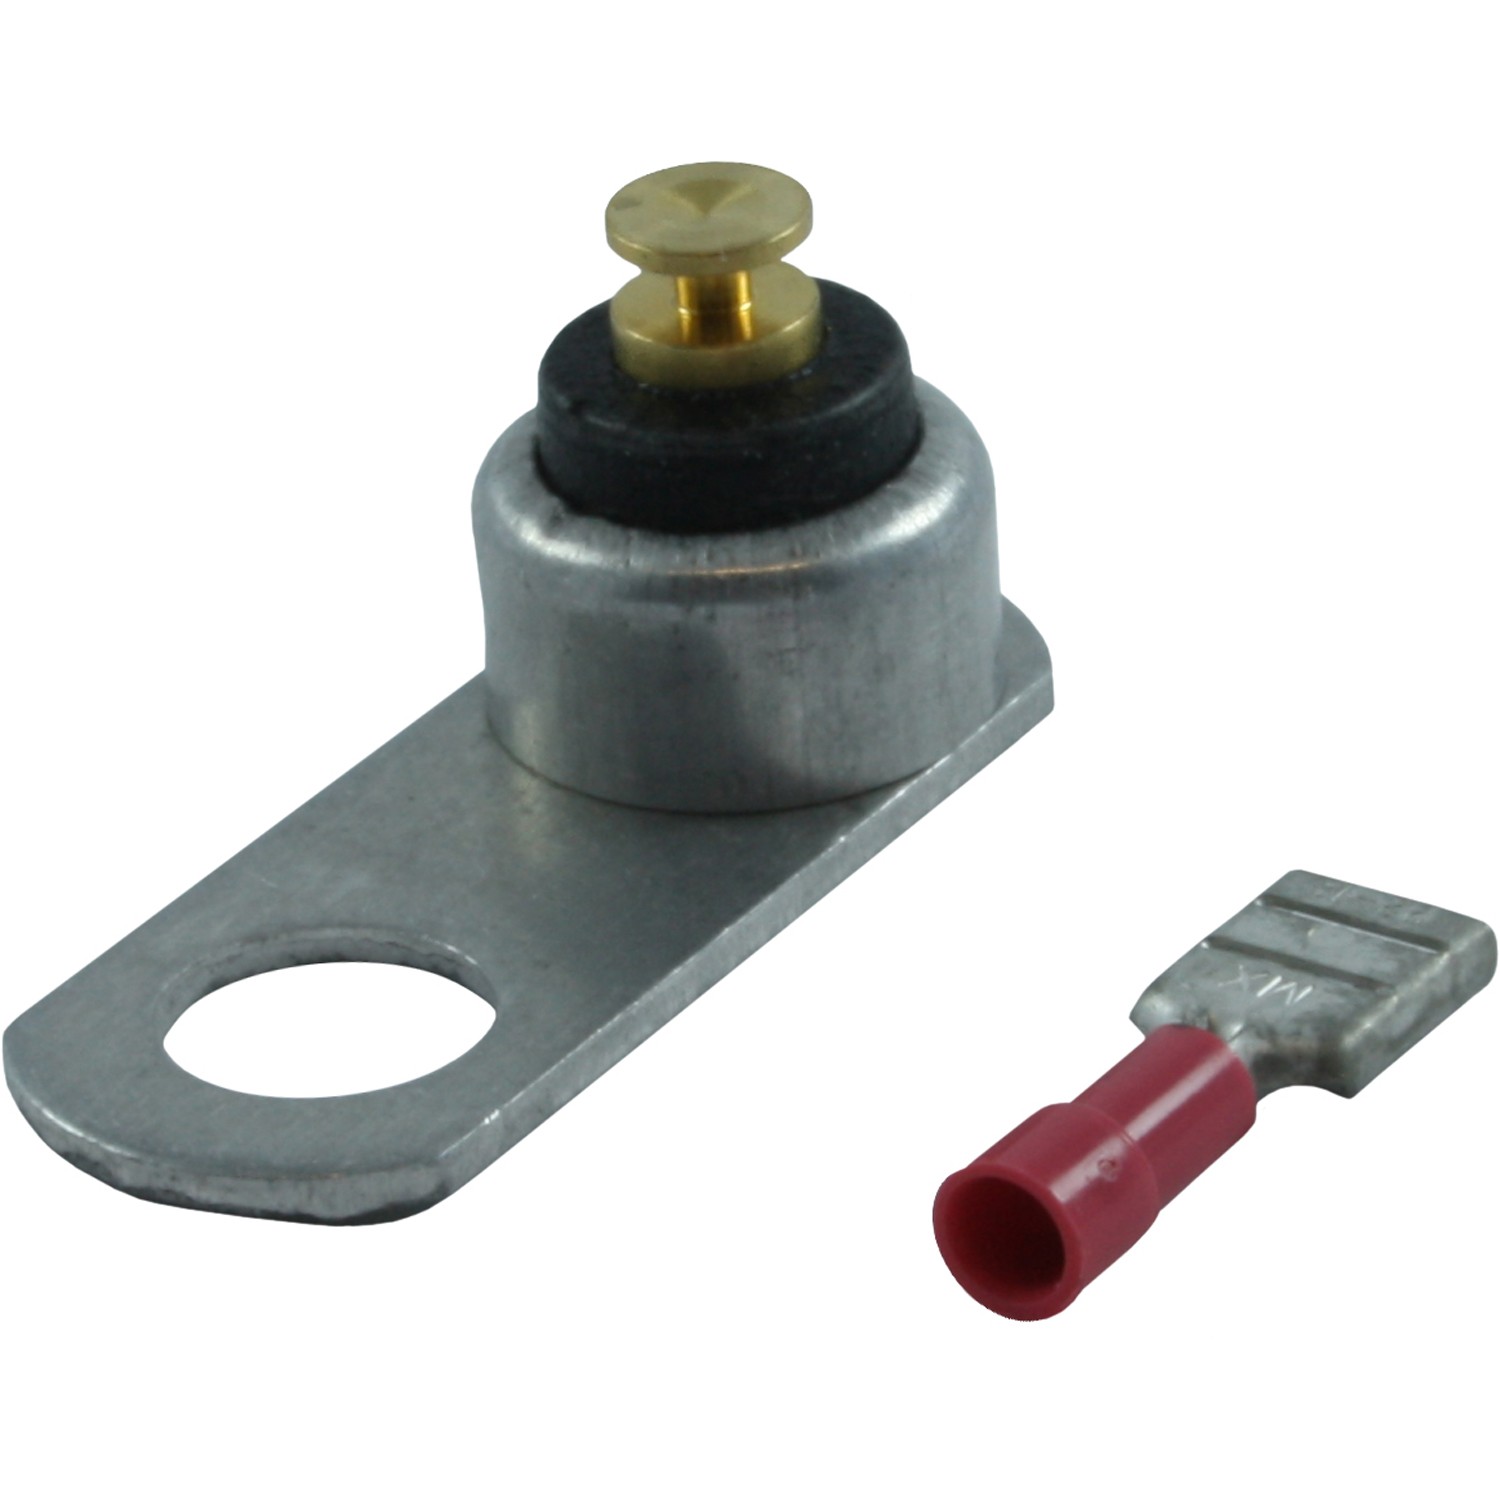 CYLINDER HEAD TEMP SENDER #TS5026 for Faria guages 